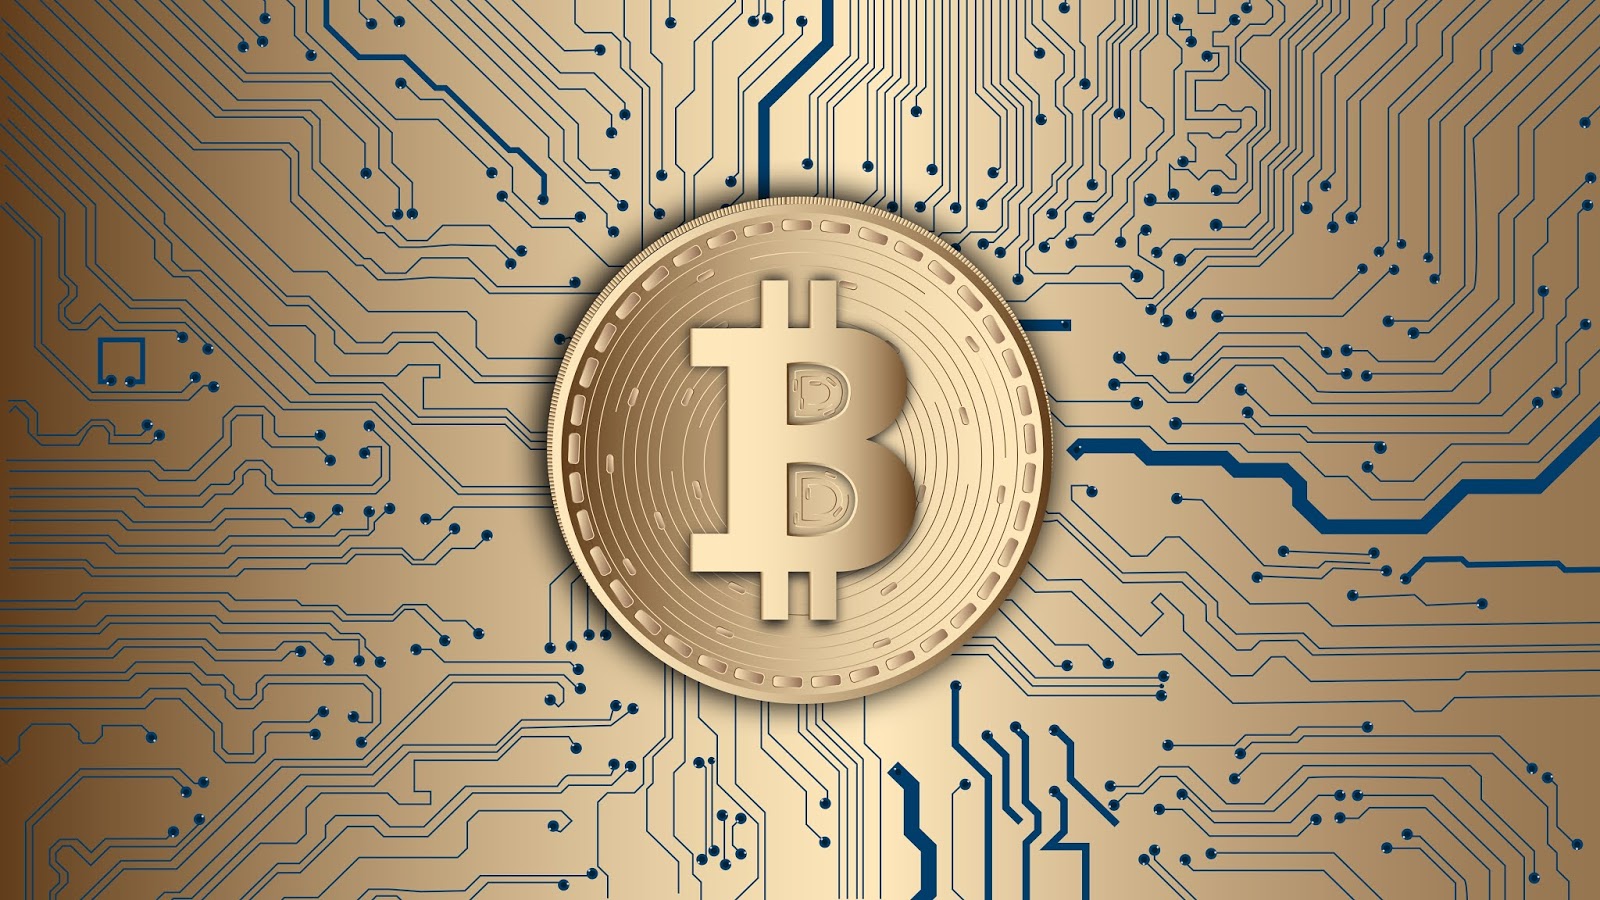 Know the importance of bitcoin and why it is has so much value